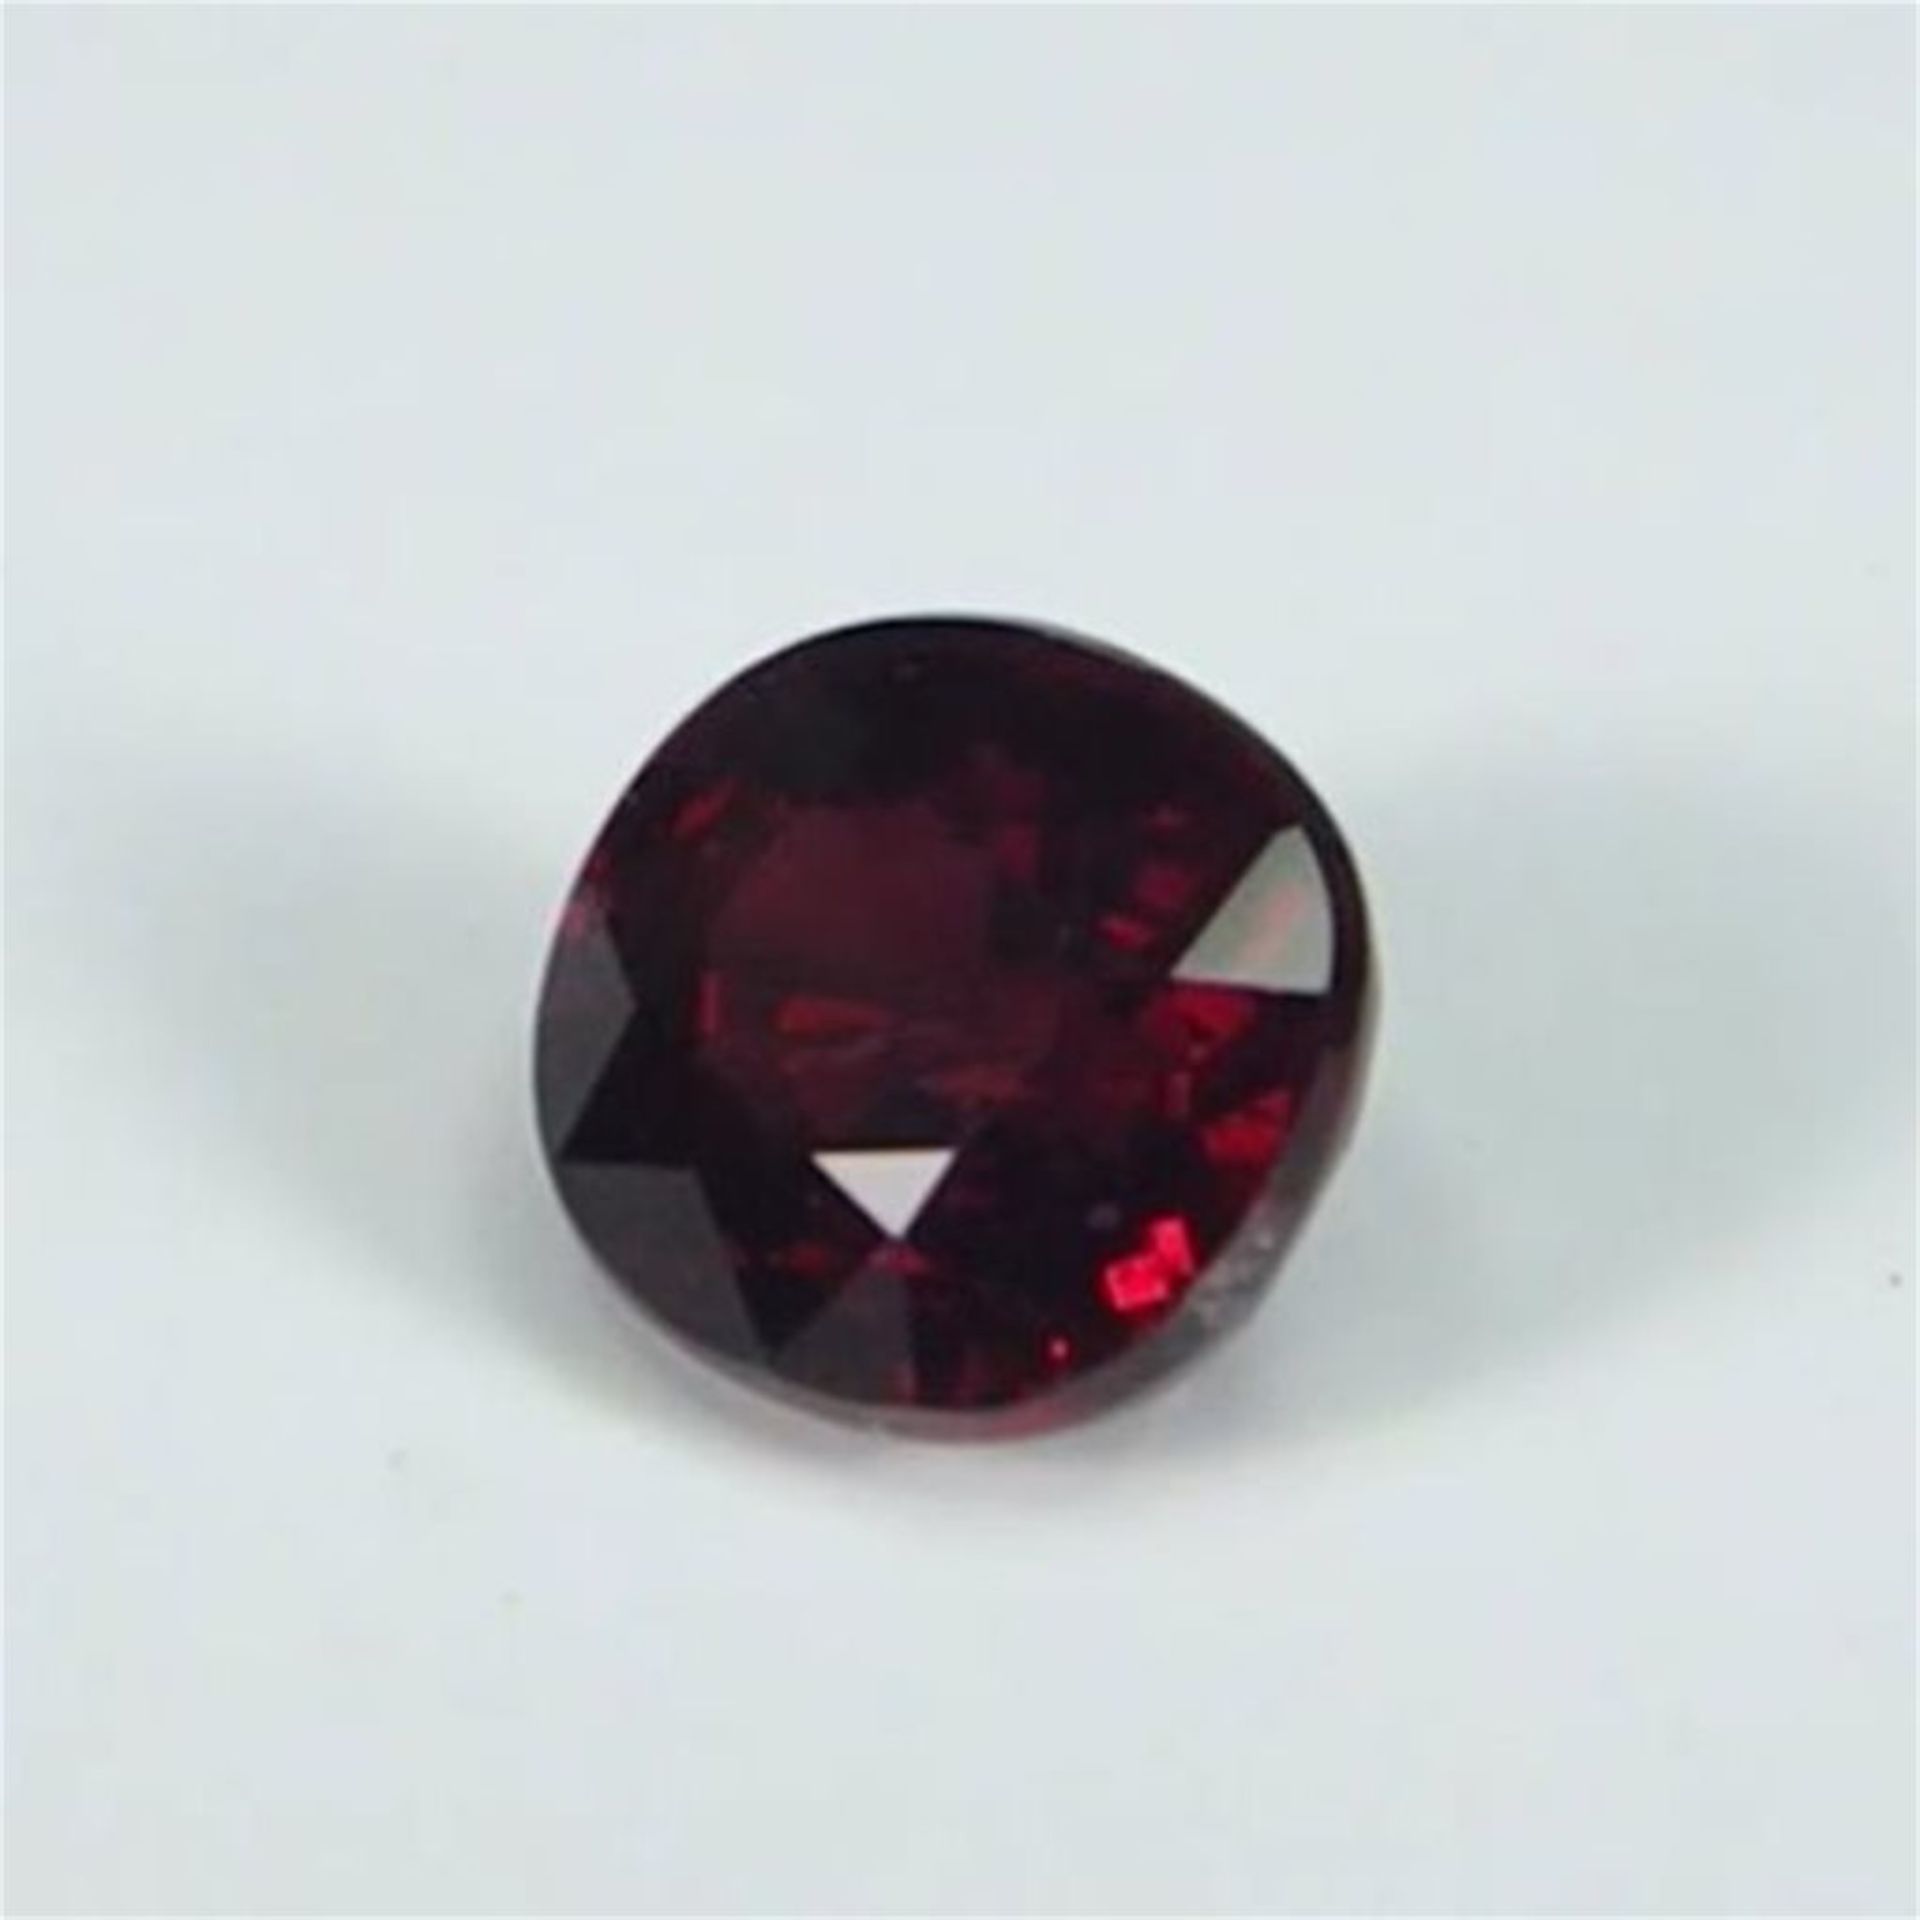 GIA Certified 1.09 ct. Untreated Pigeon’s Blood Ruby - BURMA - Image 3 of 10